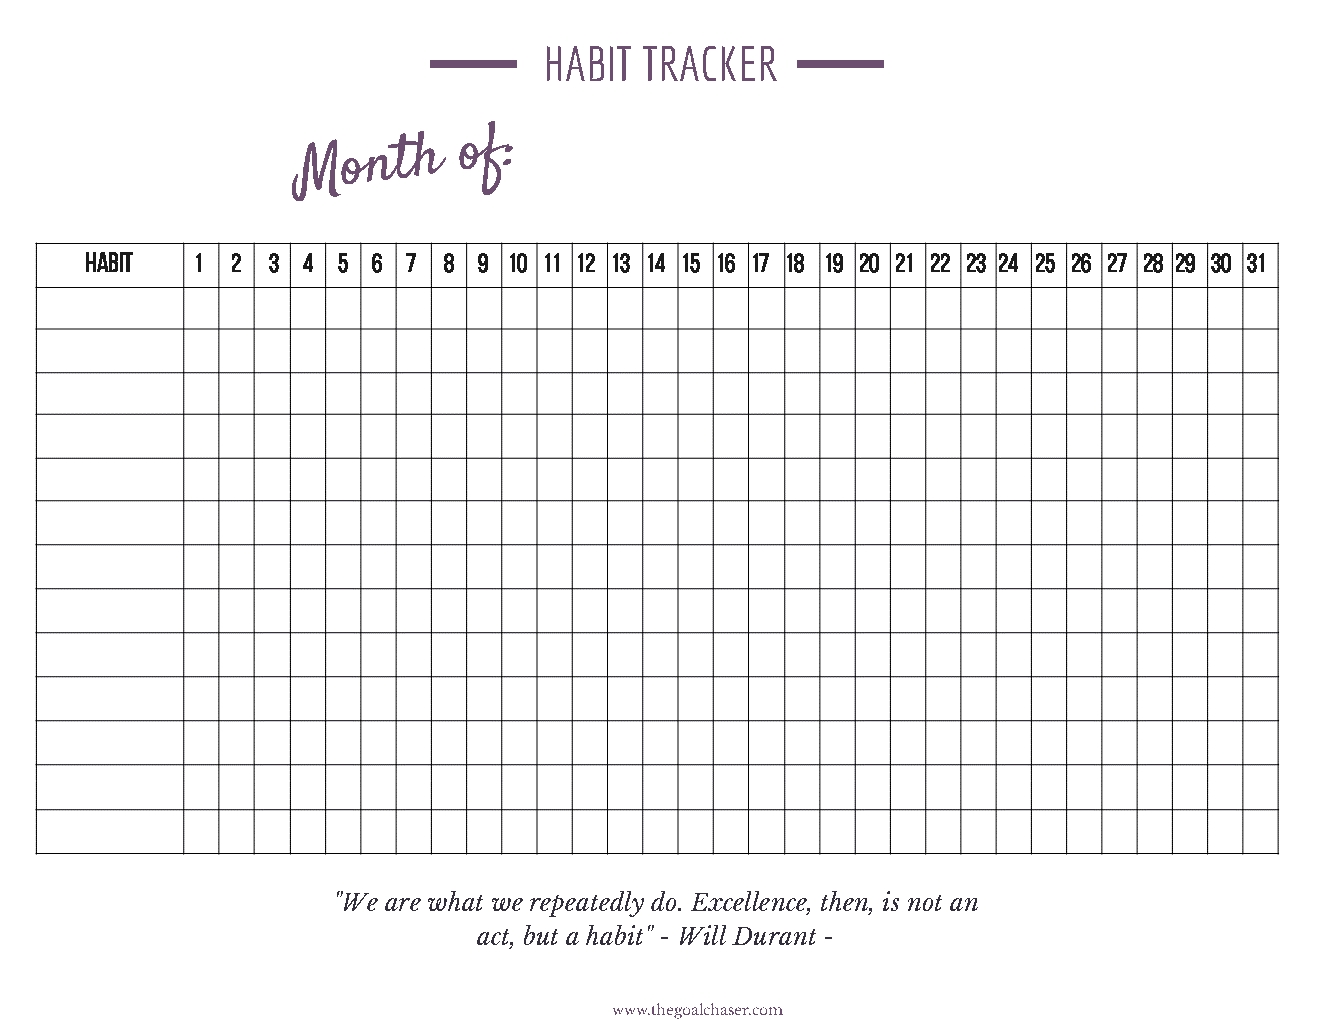 How To Set Up A Habit Tracker That Works For You